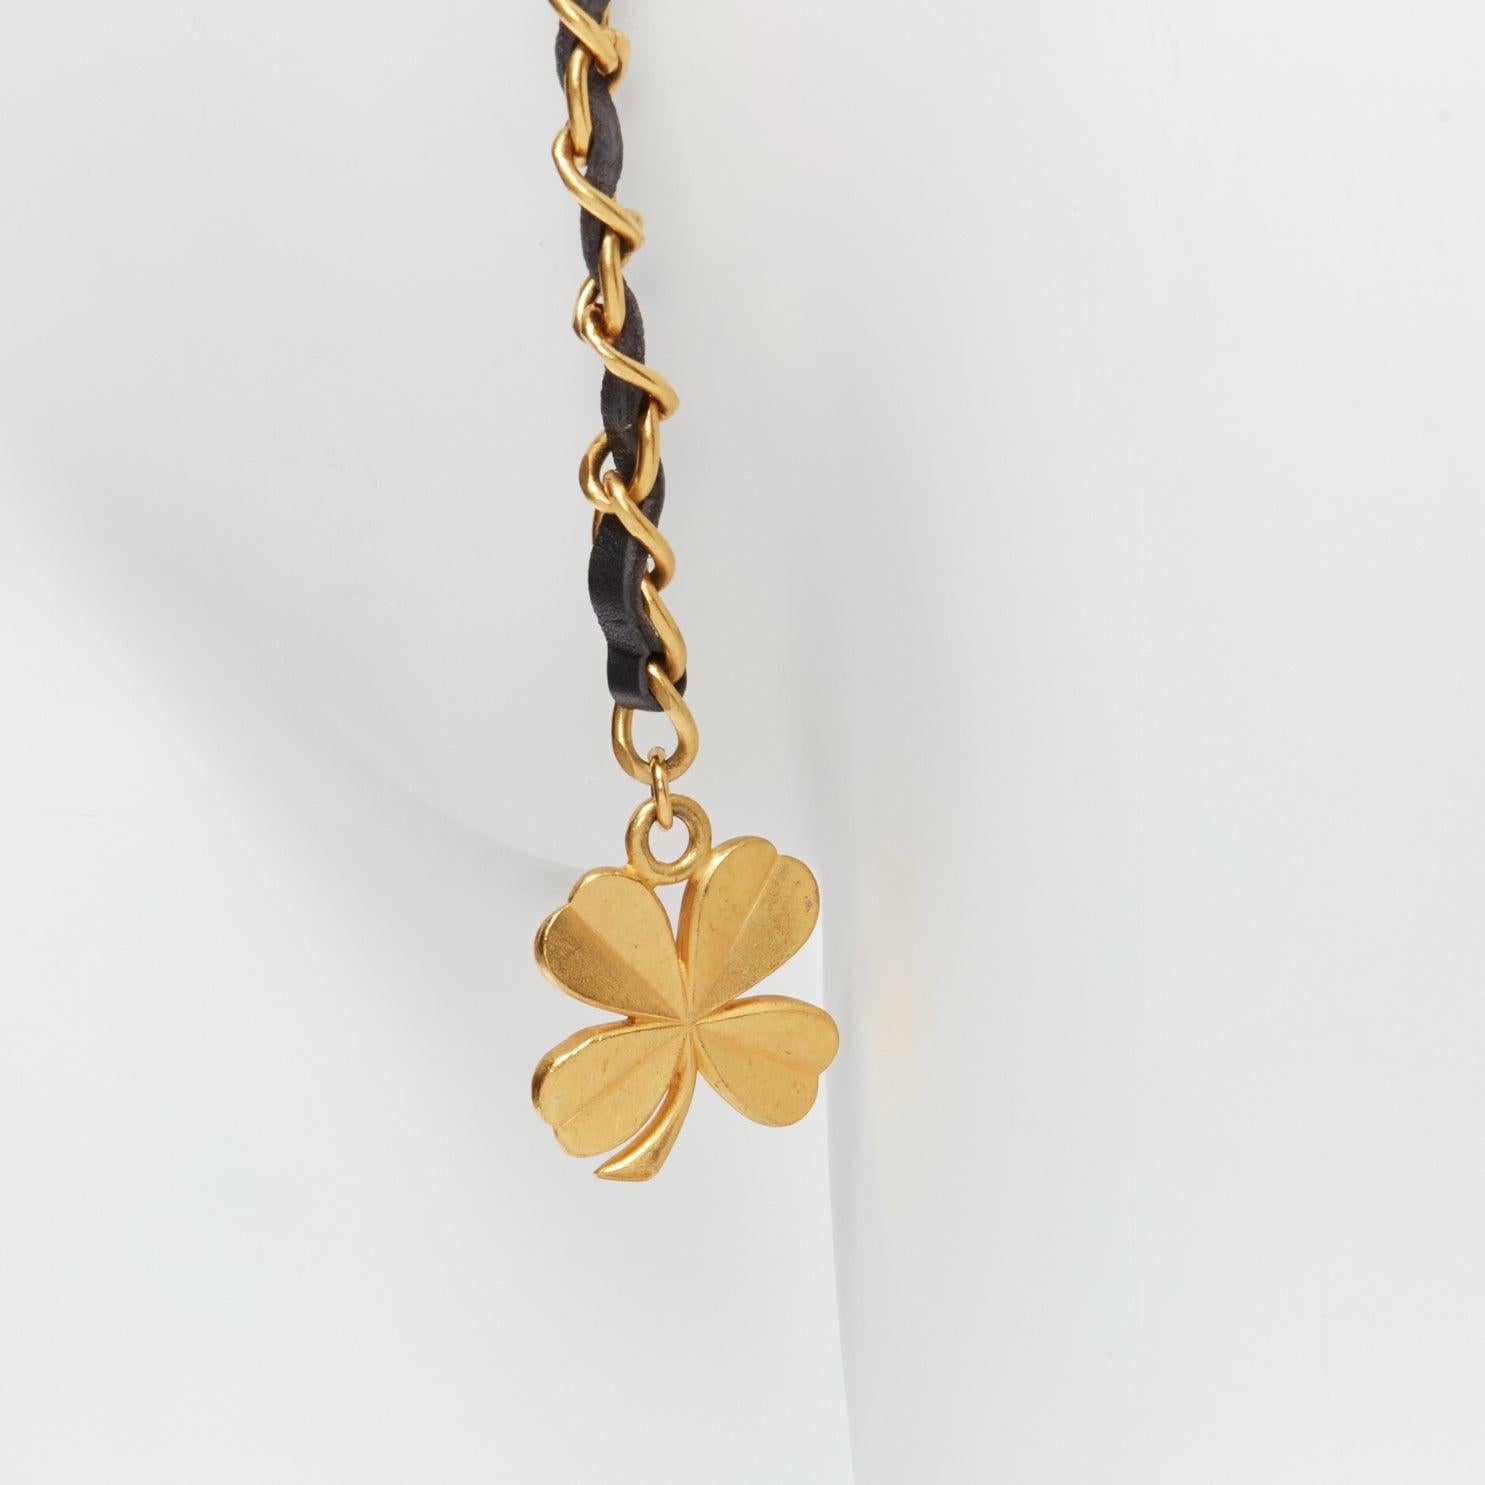 CHANEL 93A Vintage Runway gold Lucky 4 leaf clover leather double chain belt
Reference: TGAS/D00693
Brand: Chanel
Designer: Karl Lagerfeld
Collection: 93A - Runway
Material: Leather, Metal
Color: Black, Gold
Pattern: Solid
Closure: Hook &